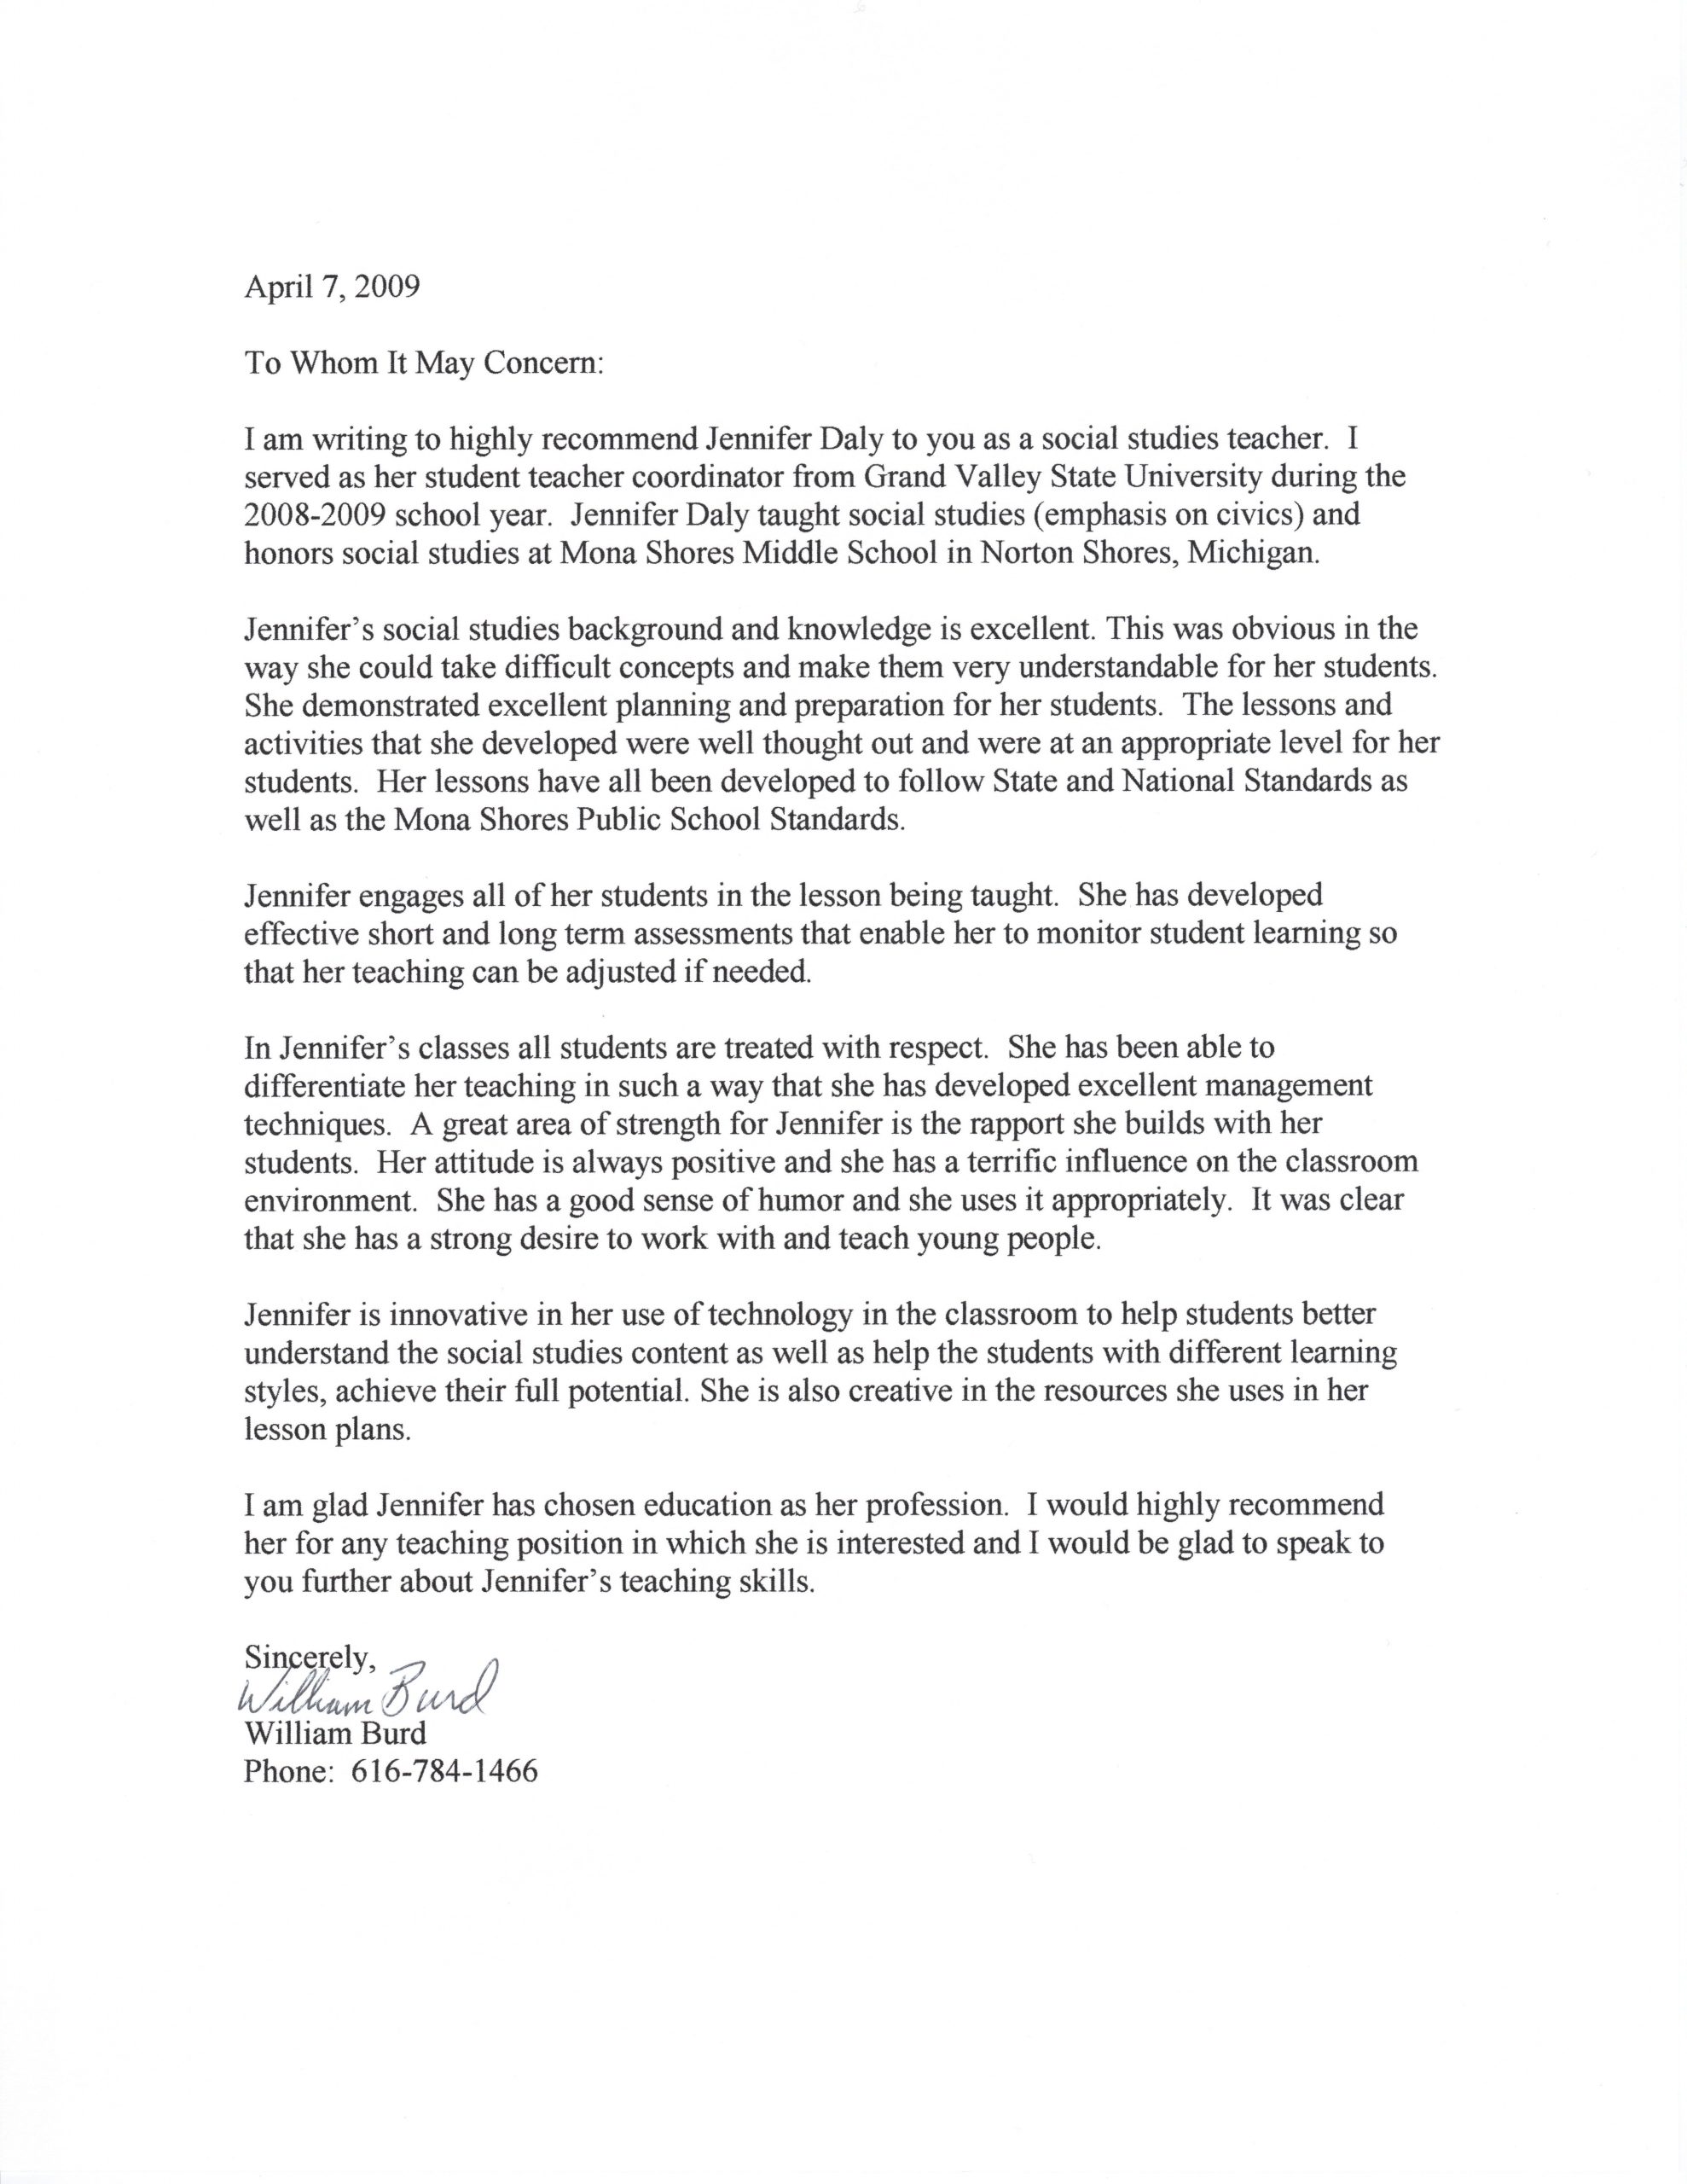 Student Teacher Recommendation Letter Examples Letter Of intended for size 5100 X 6600